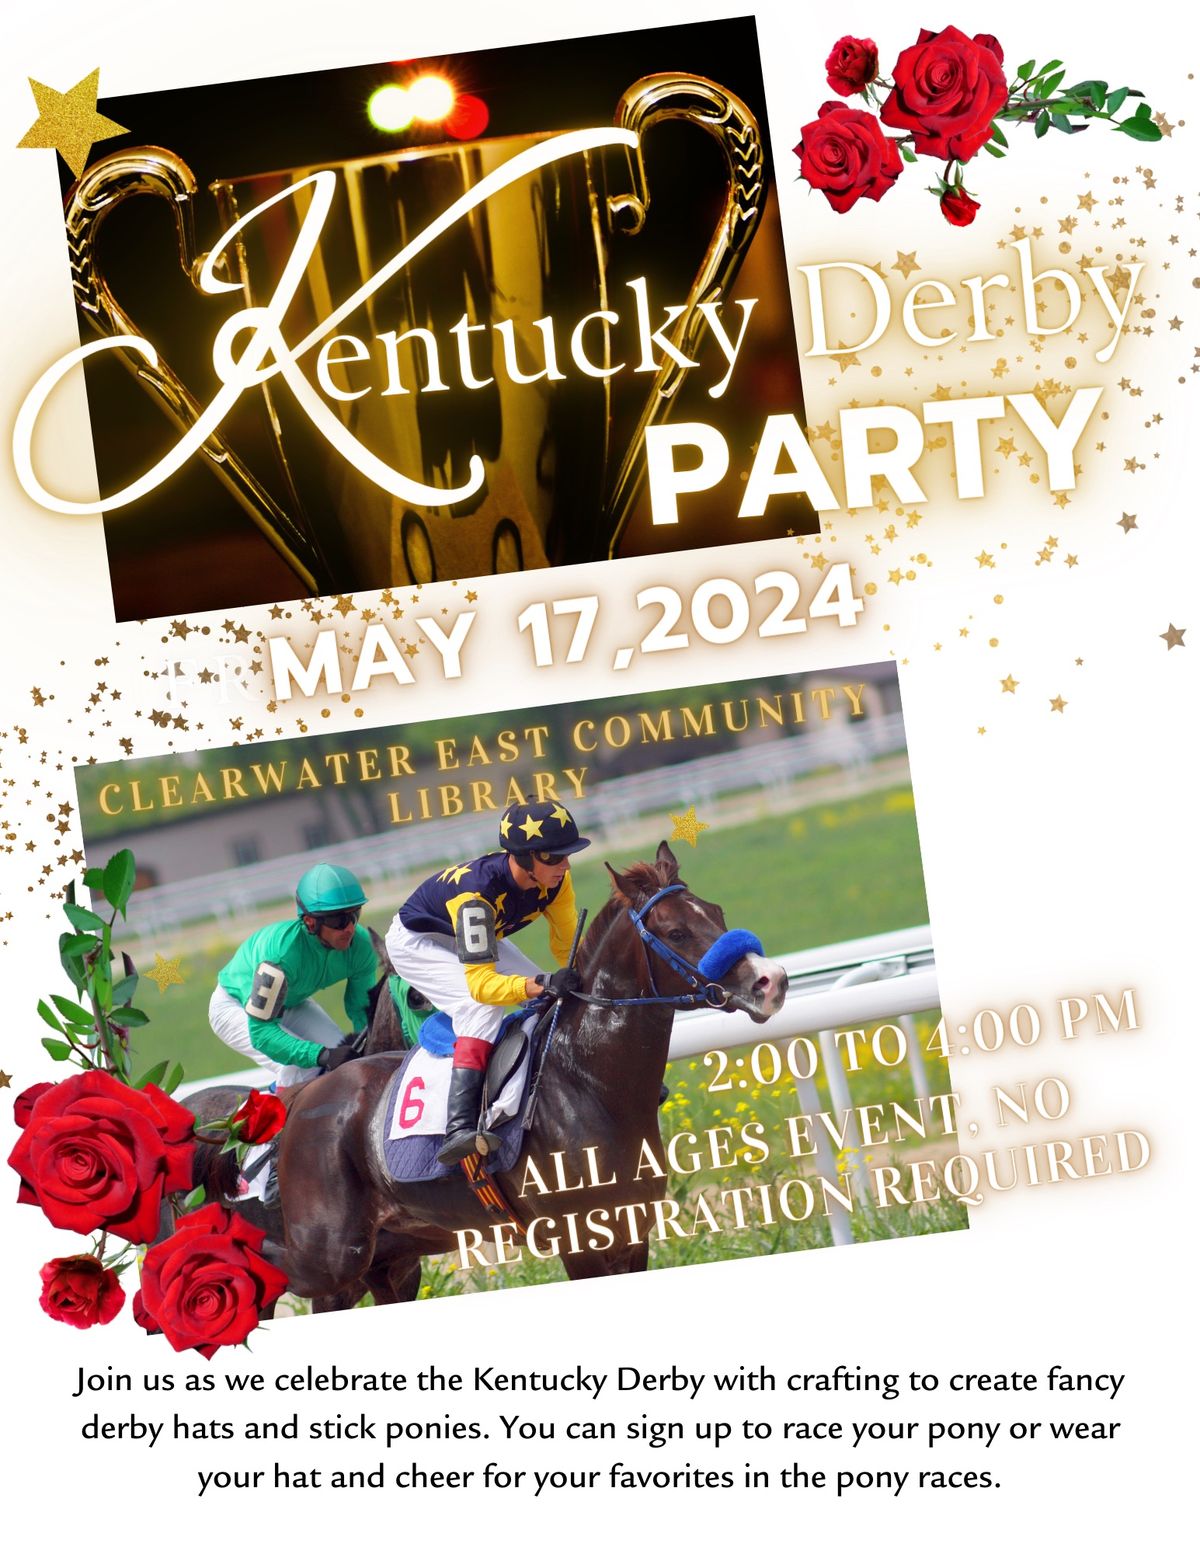 Kentucky Derby Party at East Community Library 